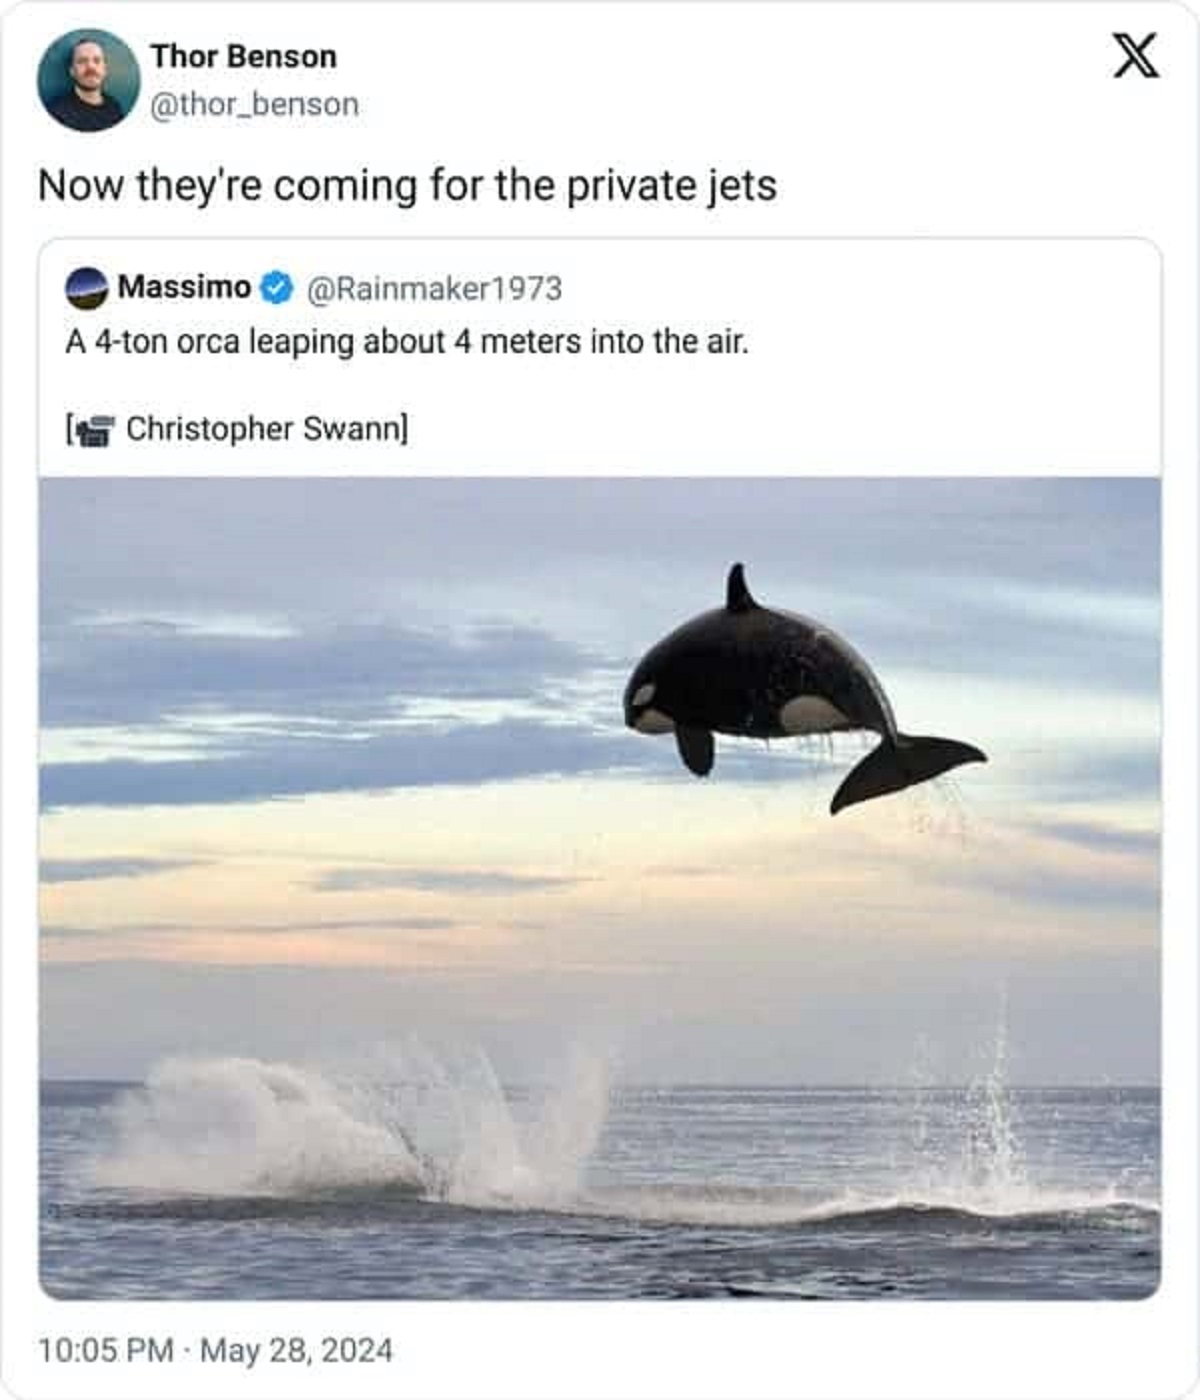 orca jumping out of the water - Thor Benson Now they're coming for the private jets Massimo A 4ton orca leaping about 4 meters into the air. Christopher Swann X